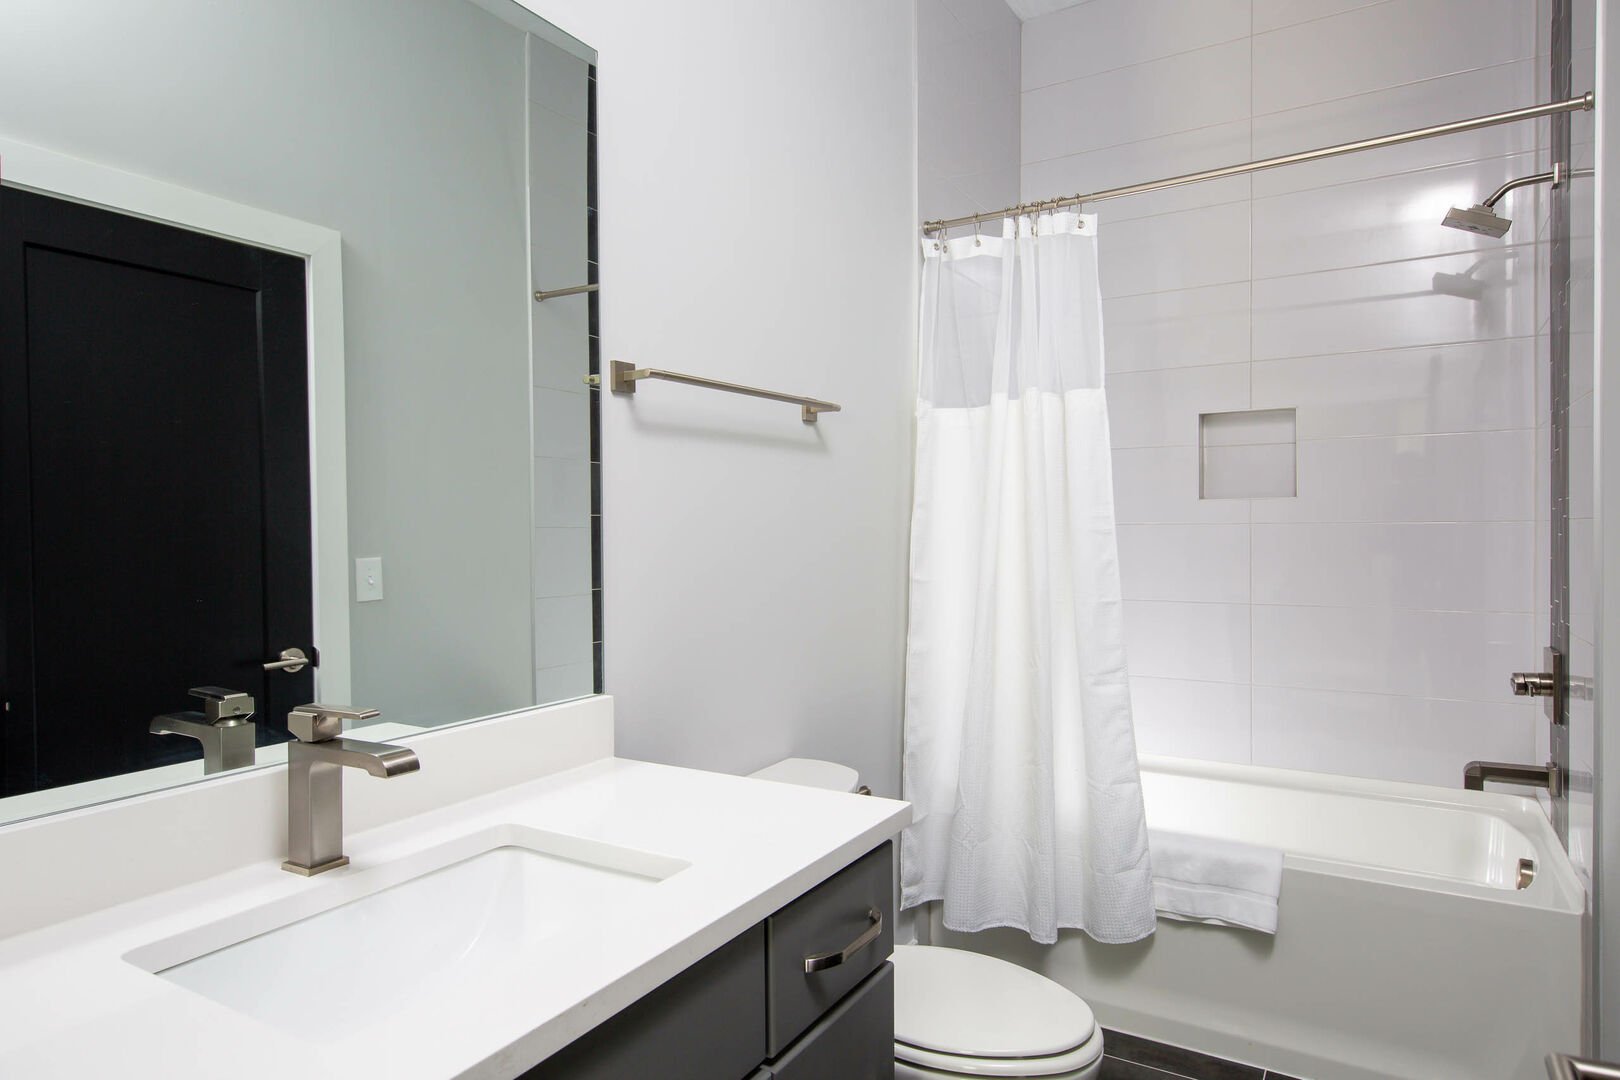 (1st Unit): 2nd bedroom attached bathroom with shower/tub combo